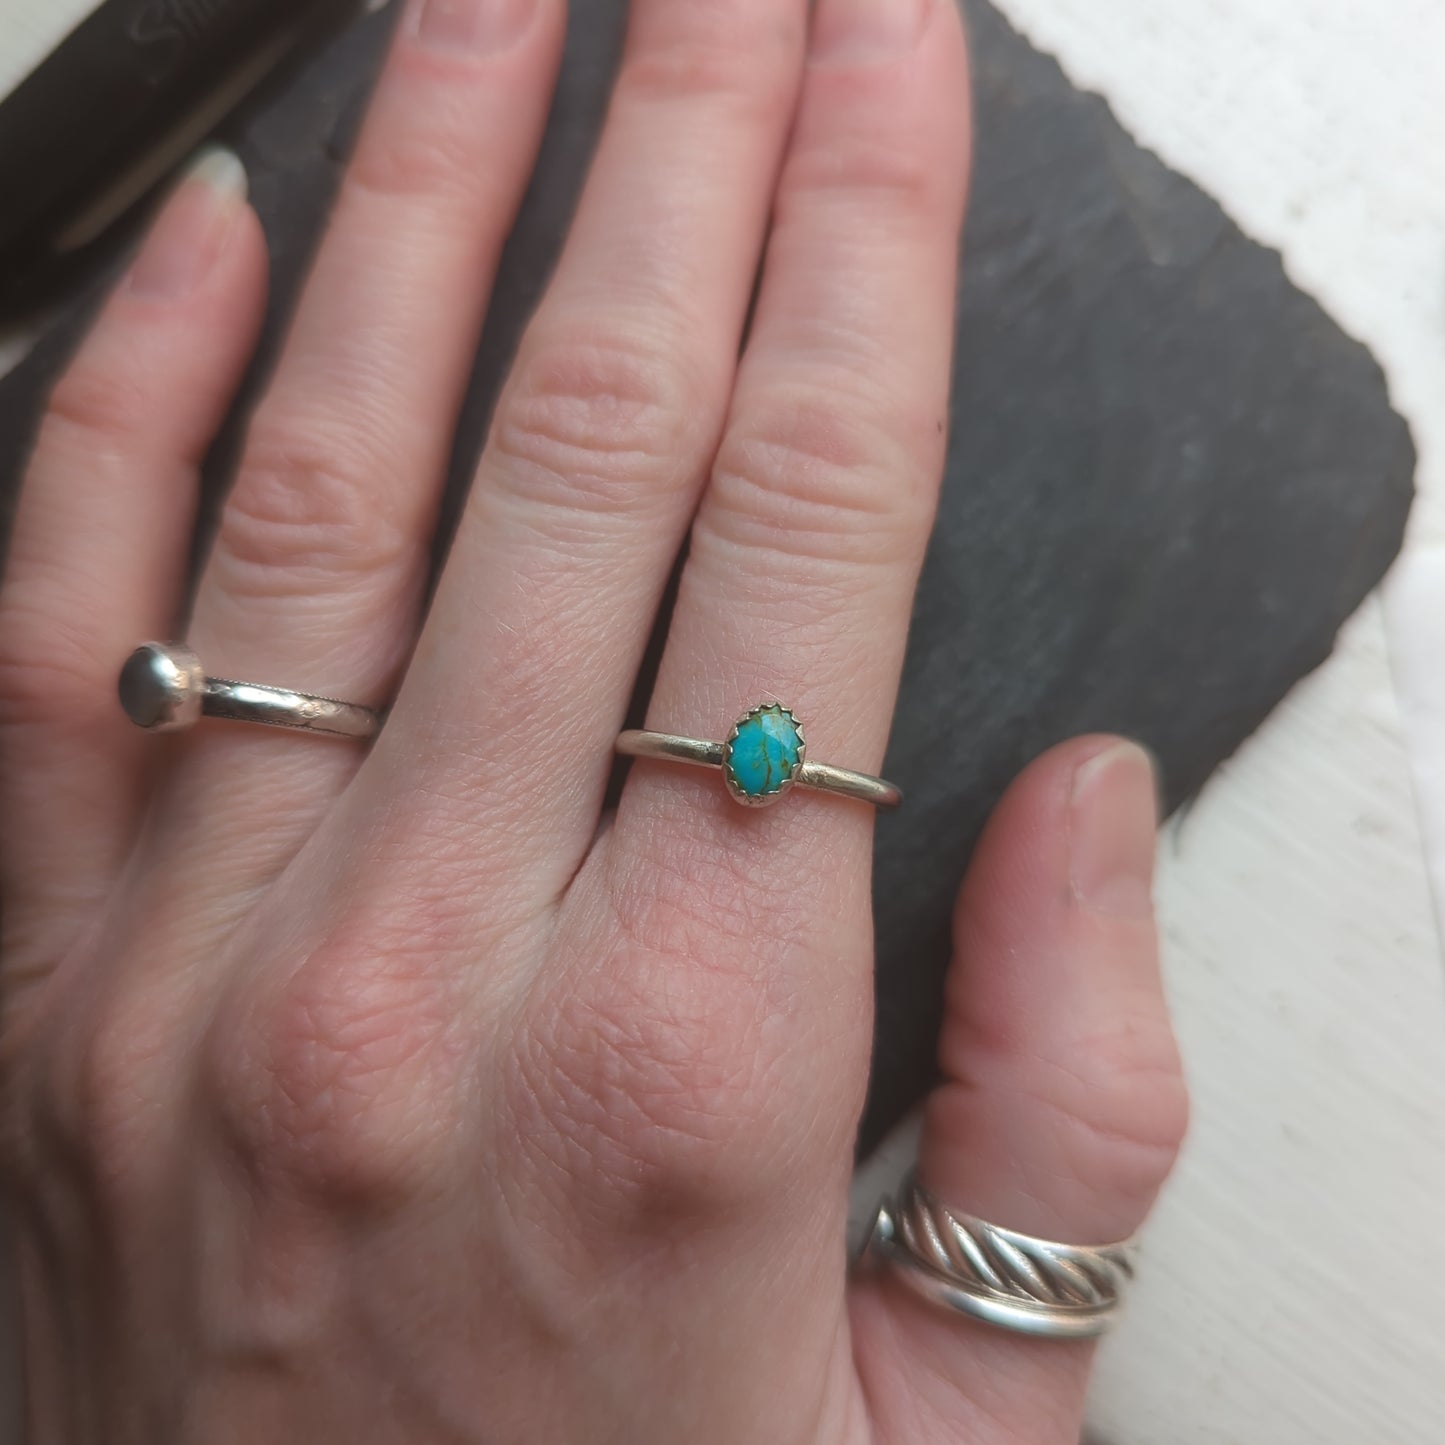 Oval Royston Turquoise Sterling Silver Ring - Size 7.5